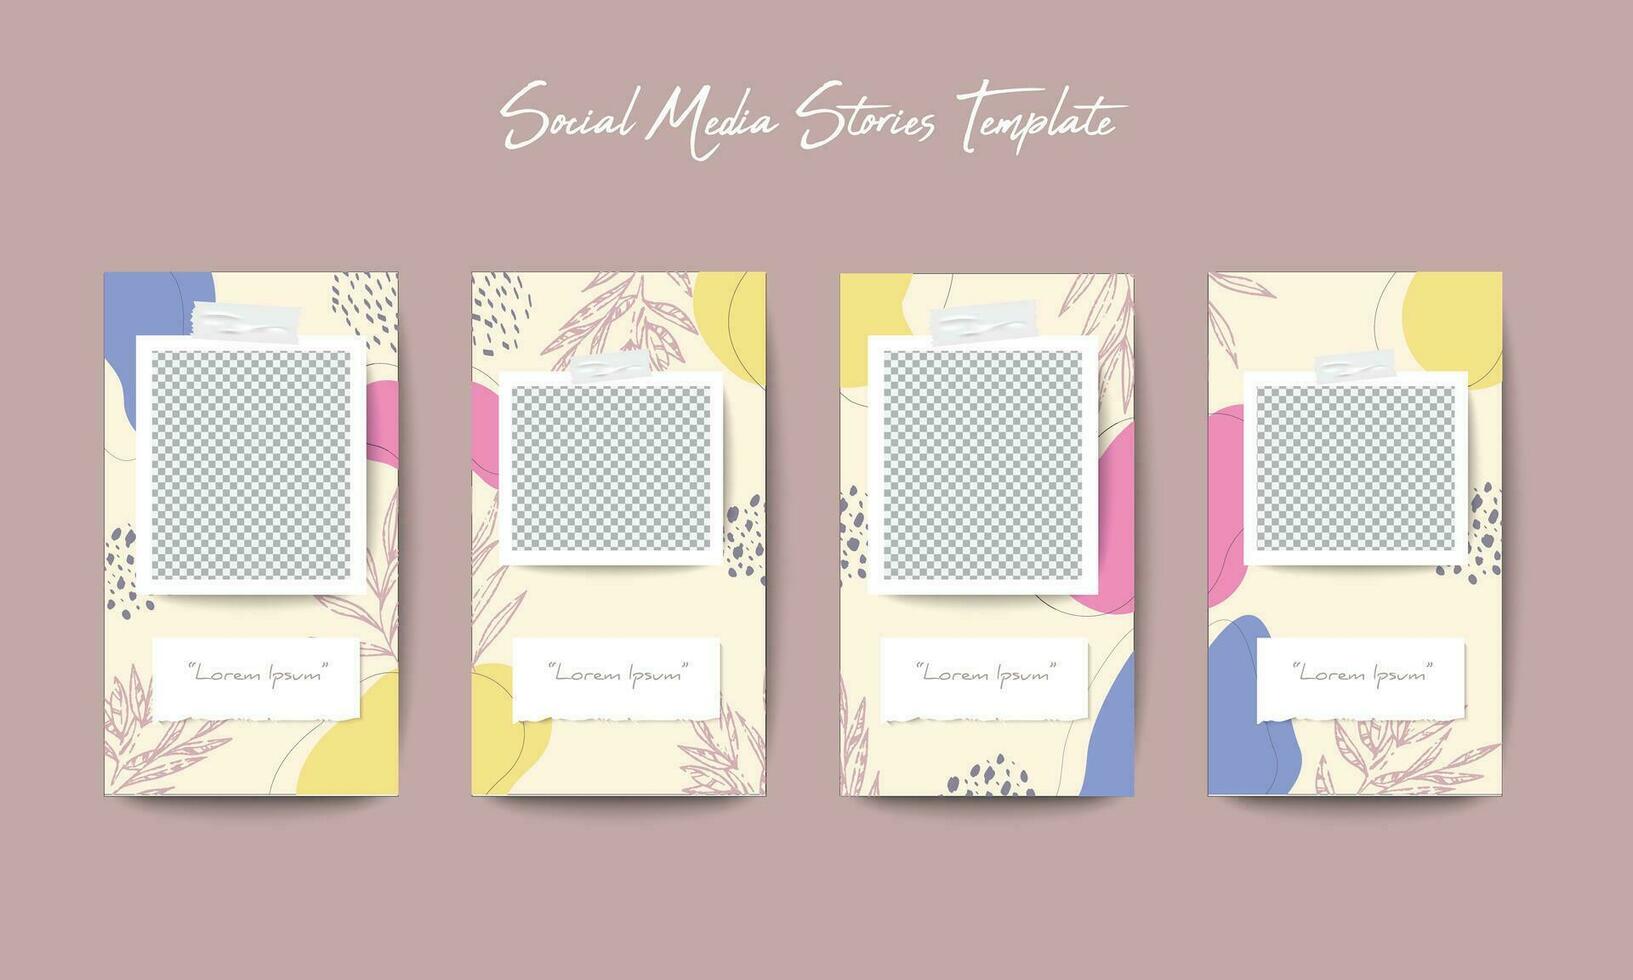 Social media story background template vector